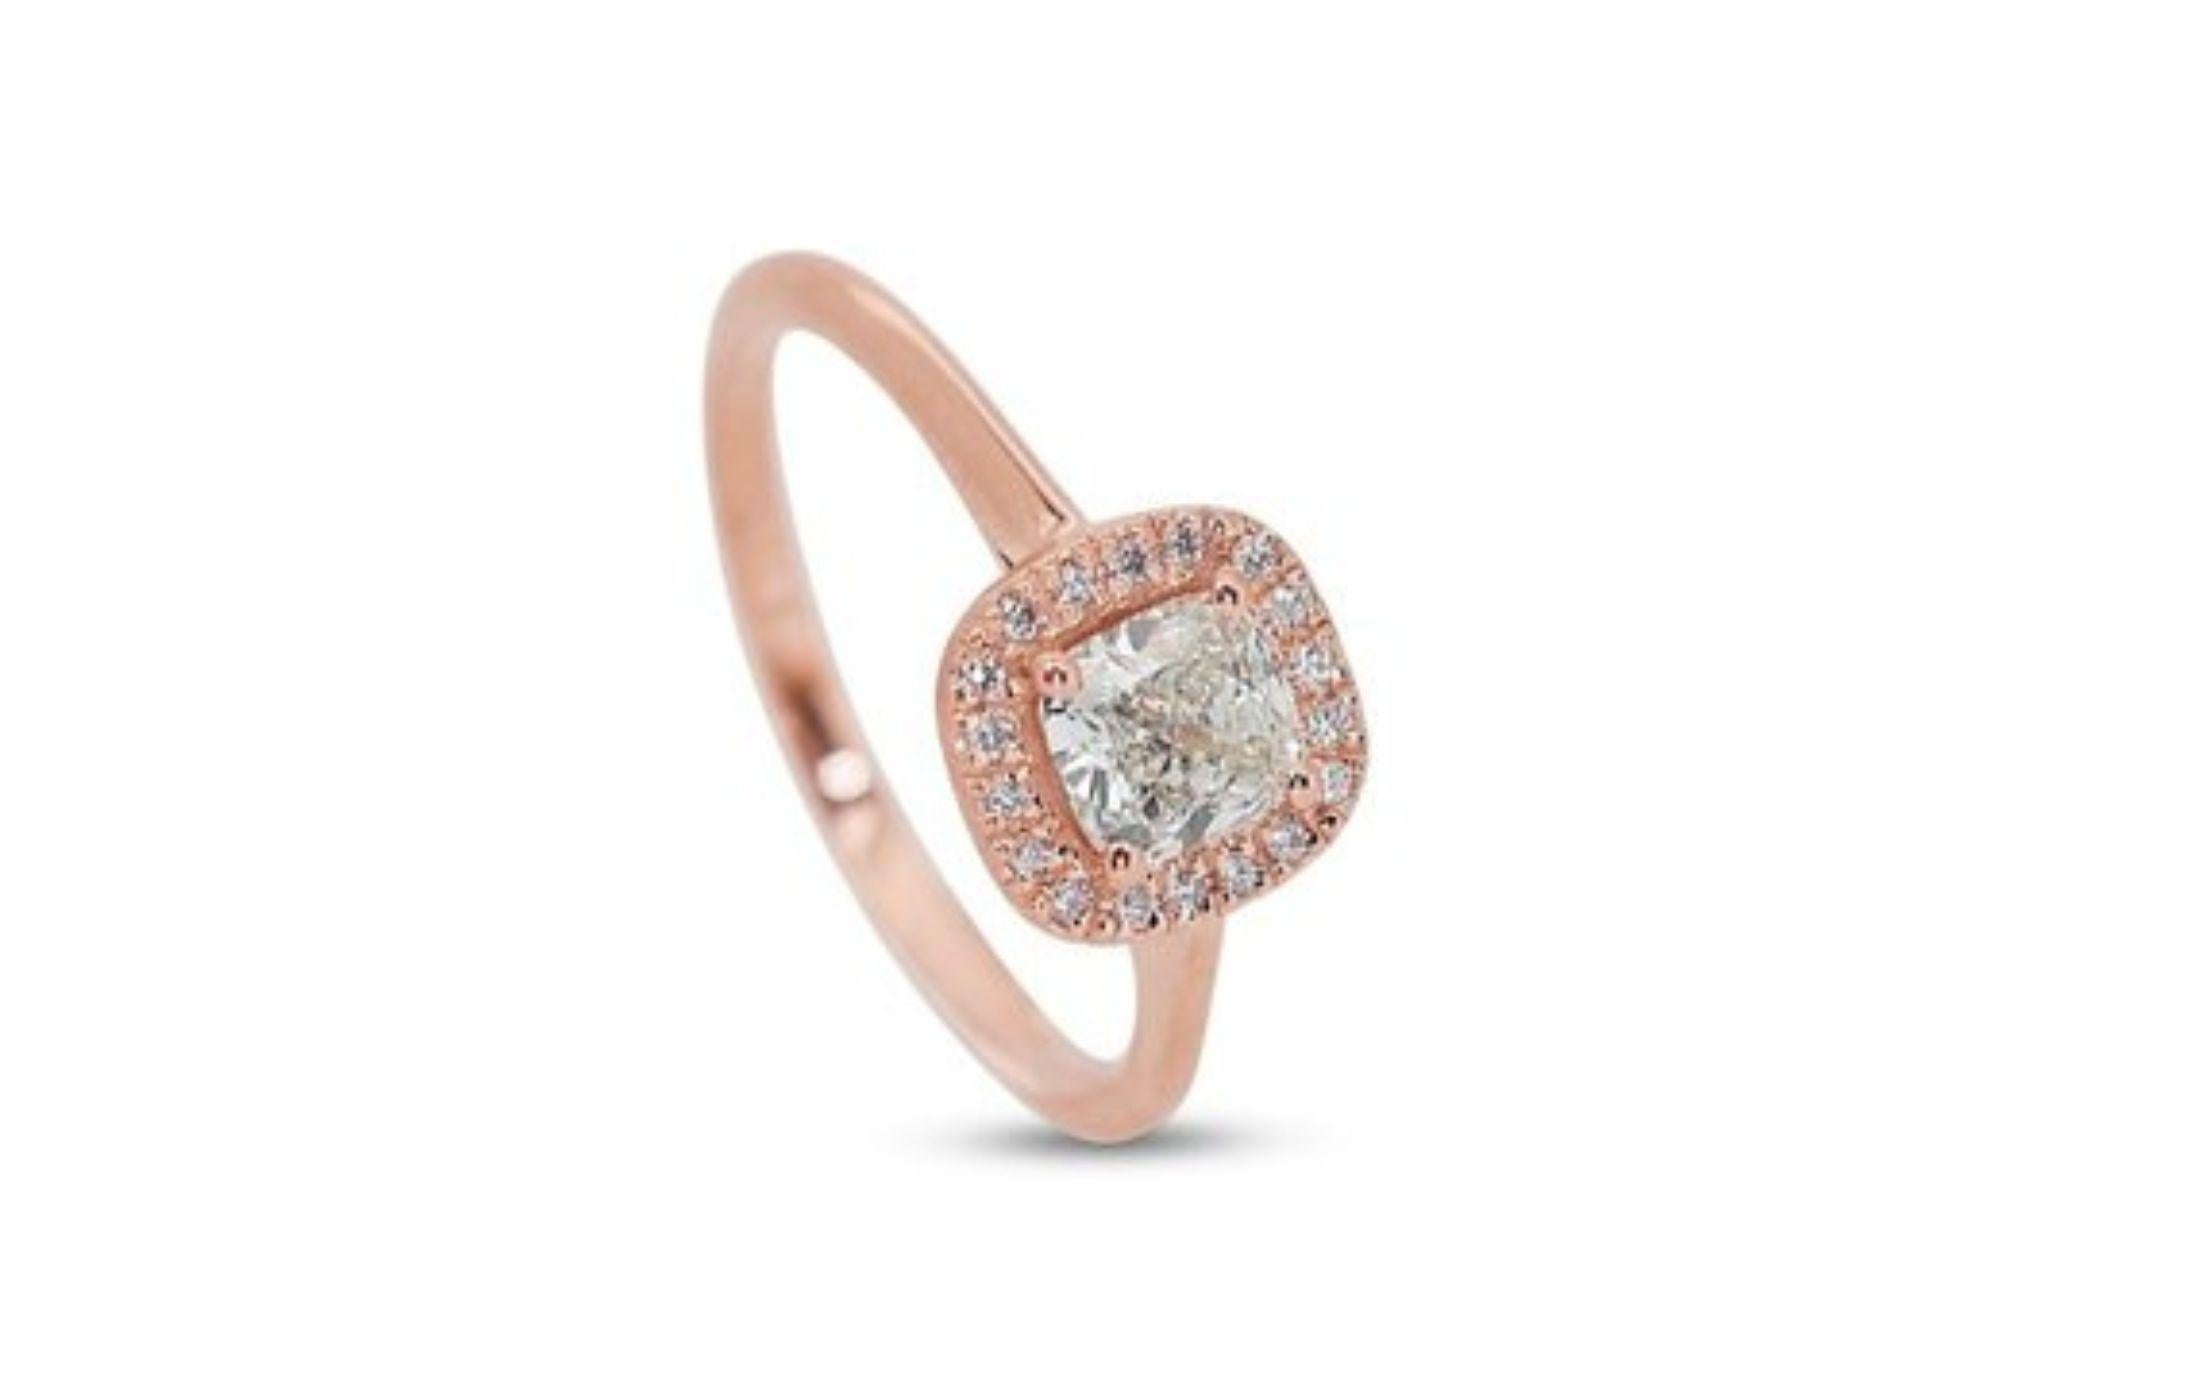 Romantic  1 Carat Cushion Diamond Ring with Dazzling Side Stones in 18K Pink Gol For Sale 2